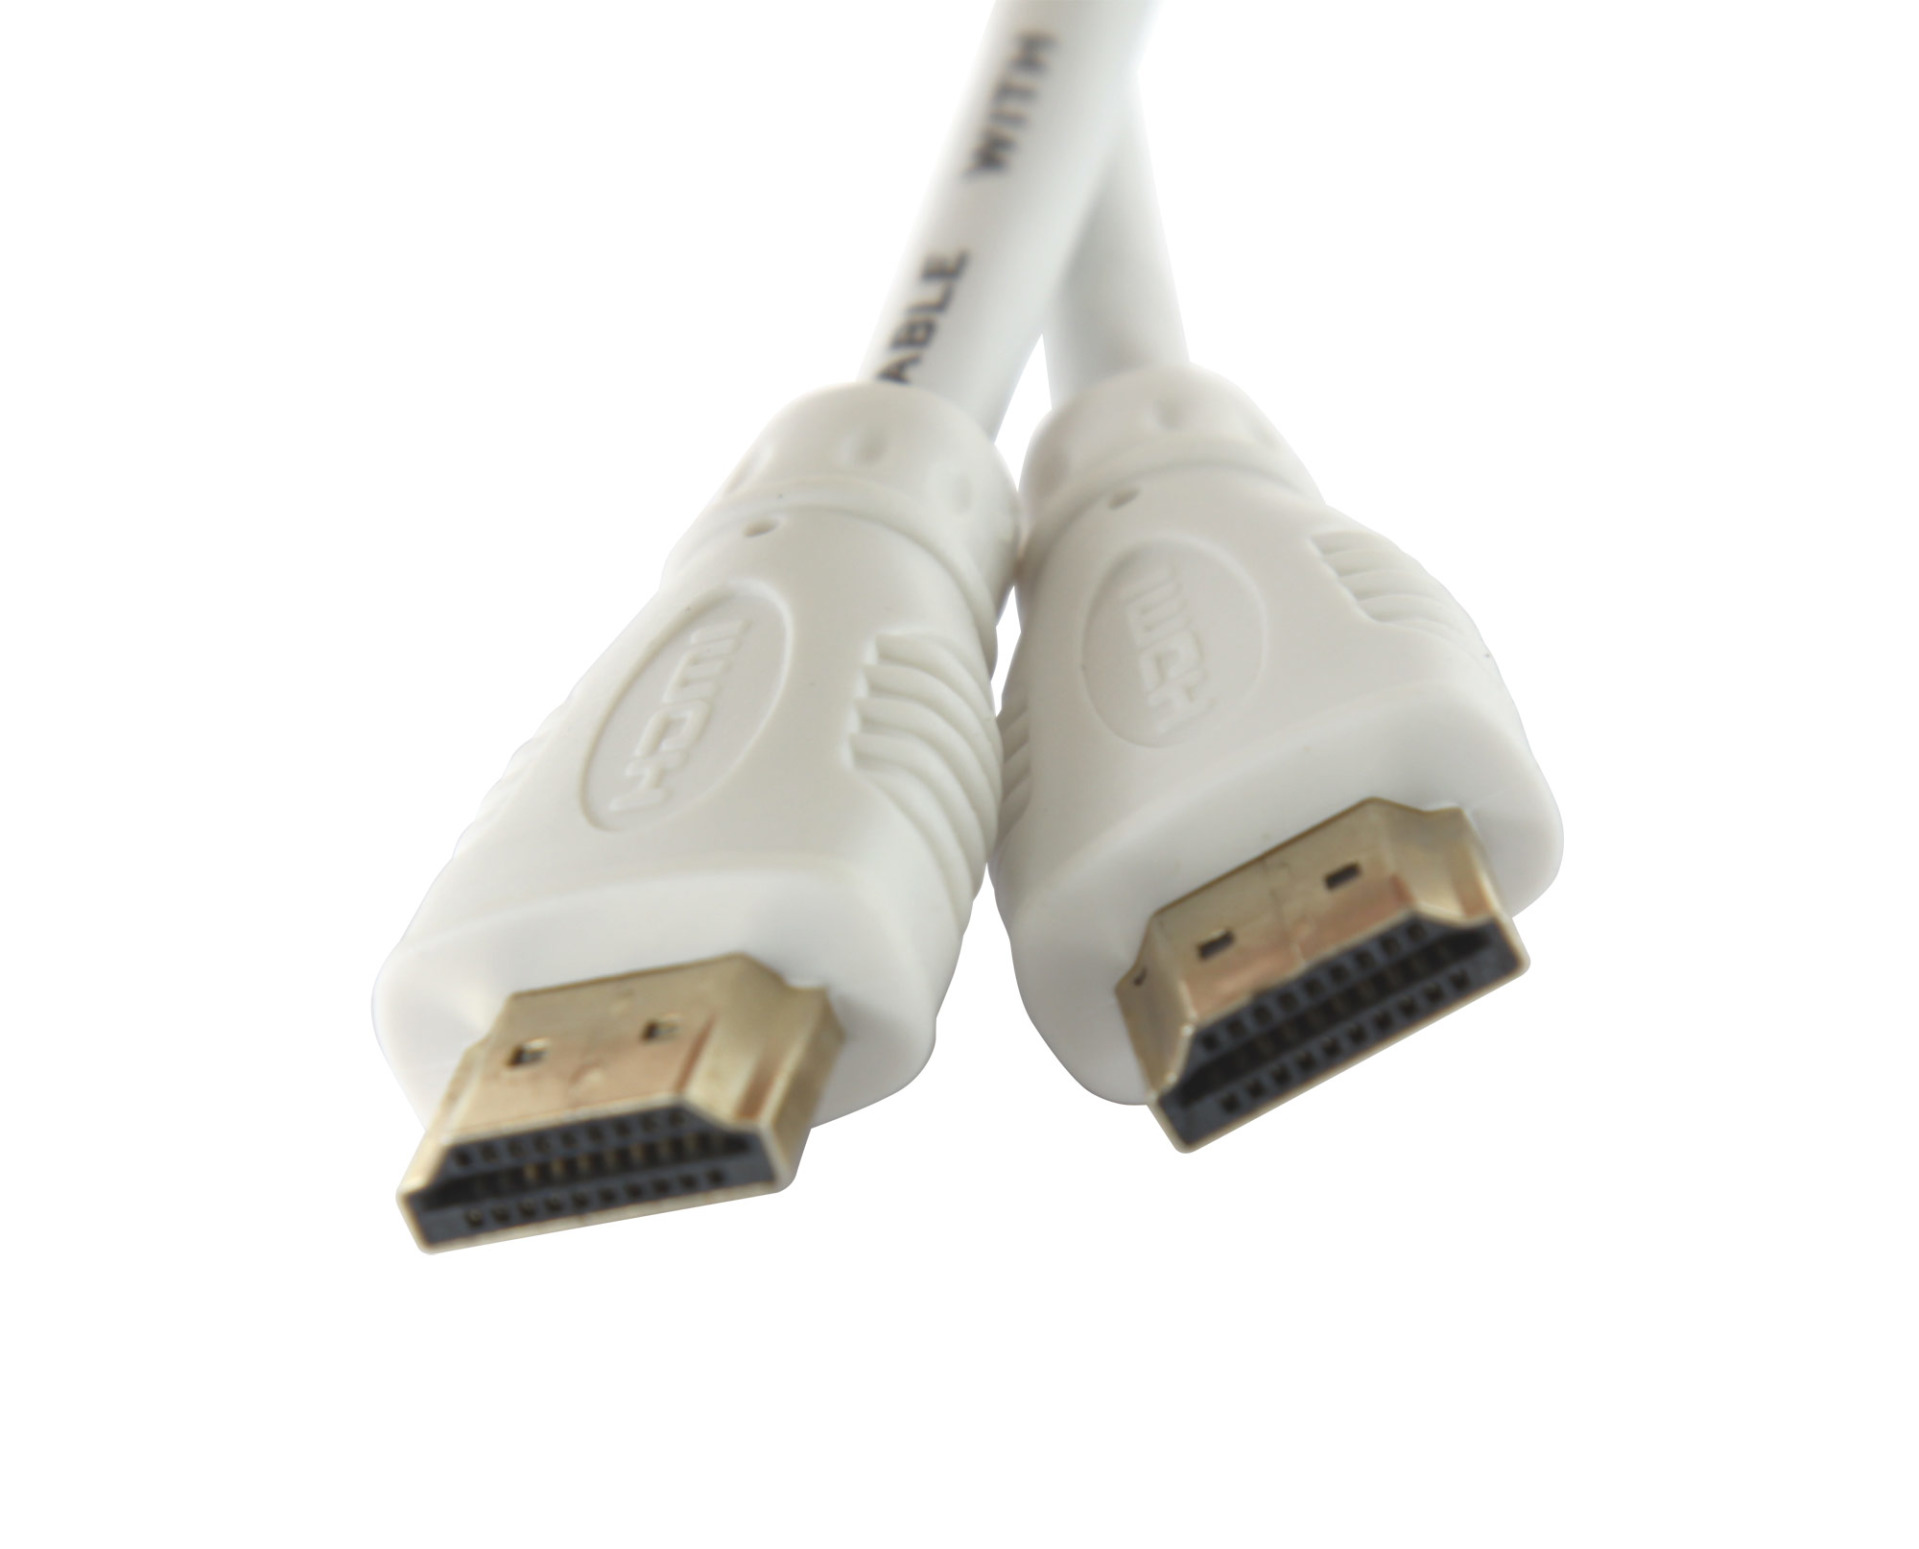 High Speed HDMI Cable with Ethernet, white, 1.5m